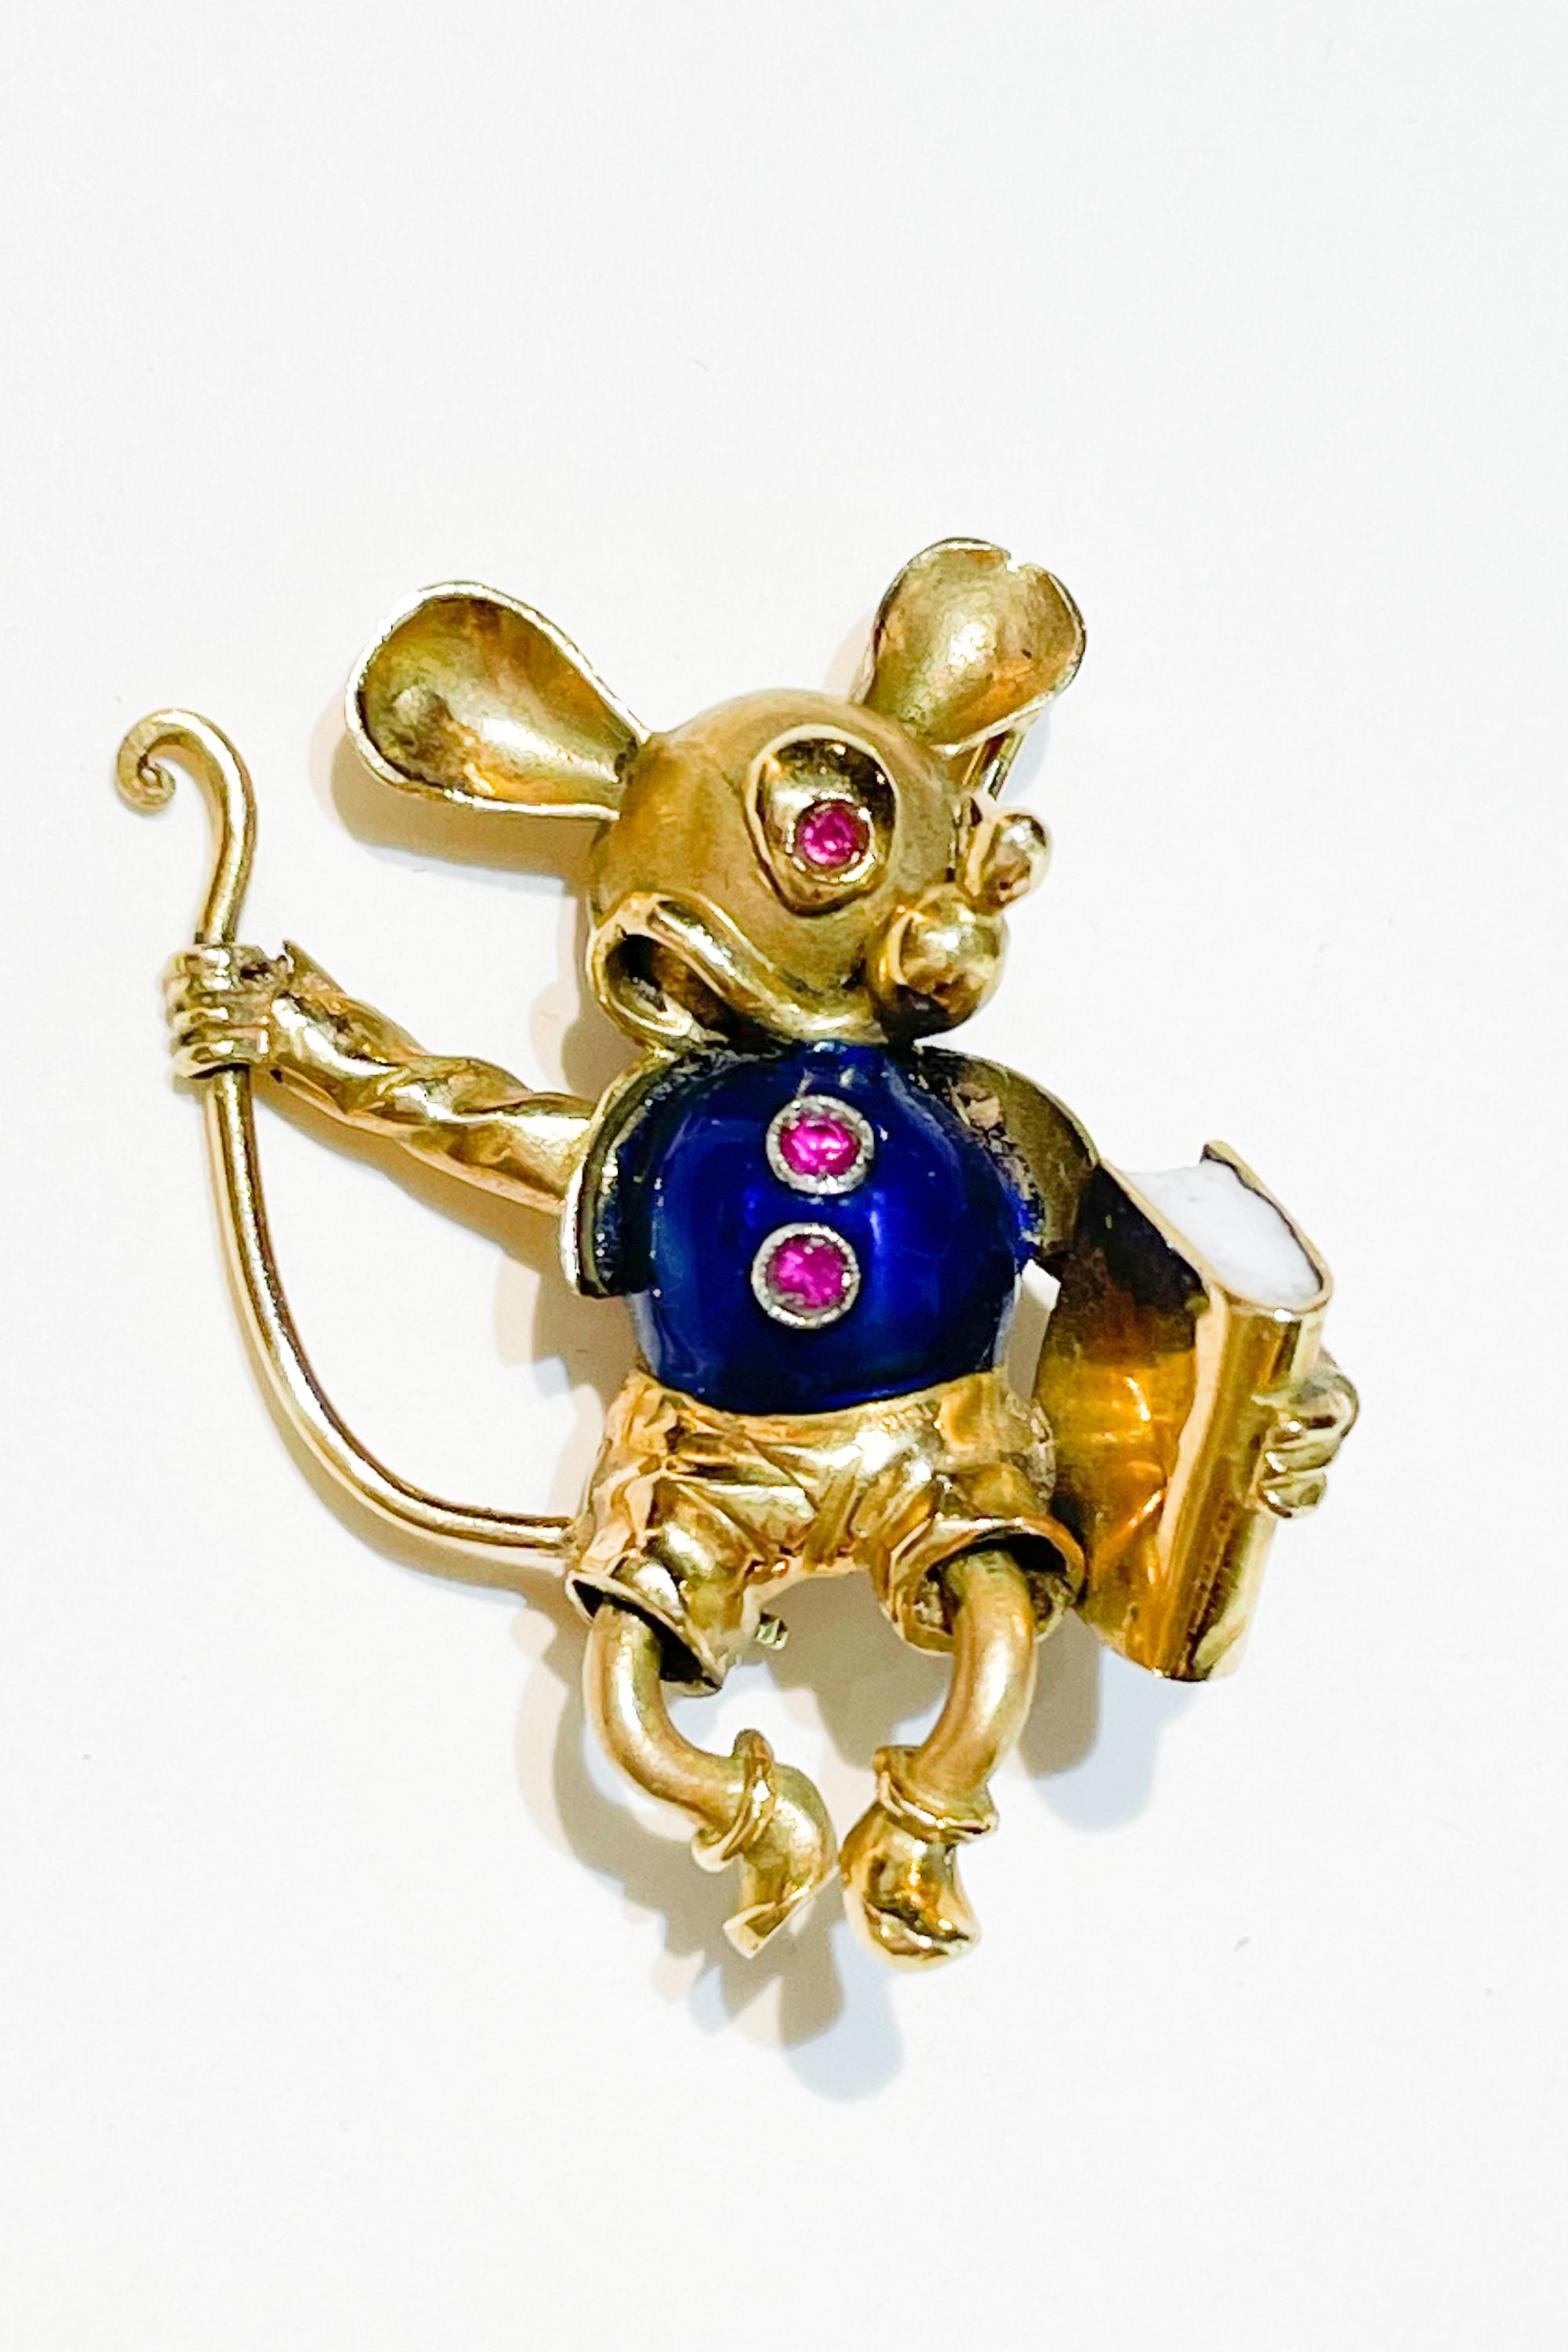 Mickey or Micky Mouse Brooch in 18 carat Yellow Gold and Enamels.